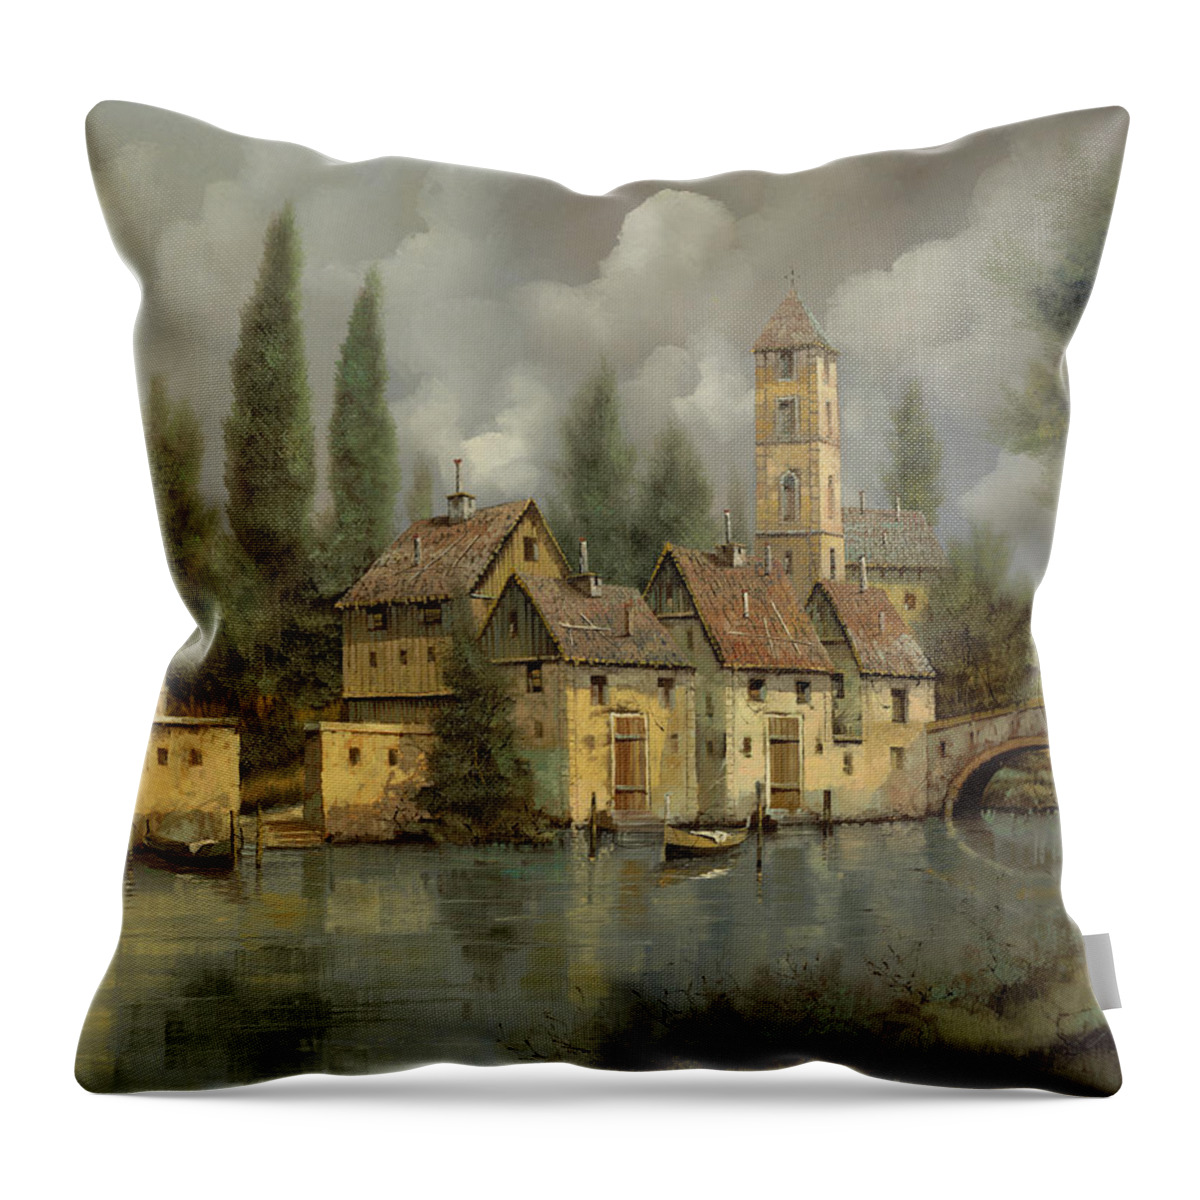 River Throw Pillow featuring the painting Il Borgo Sul Fiume by Guido Borelli